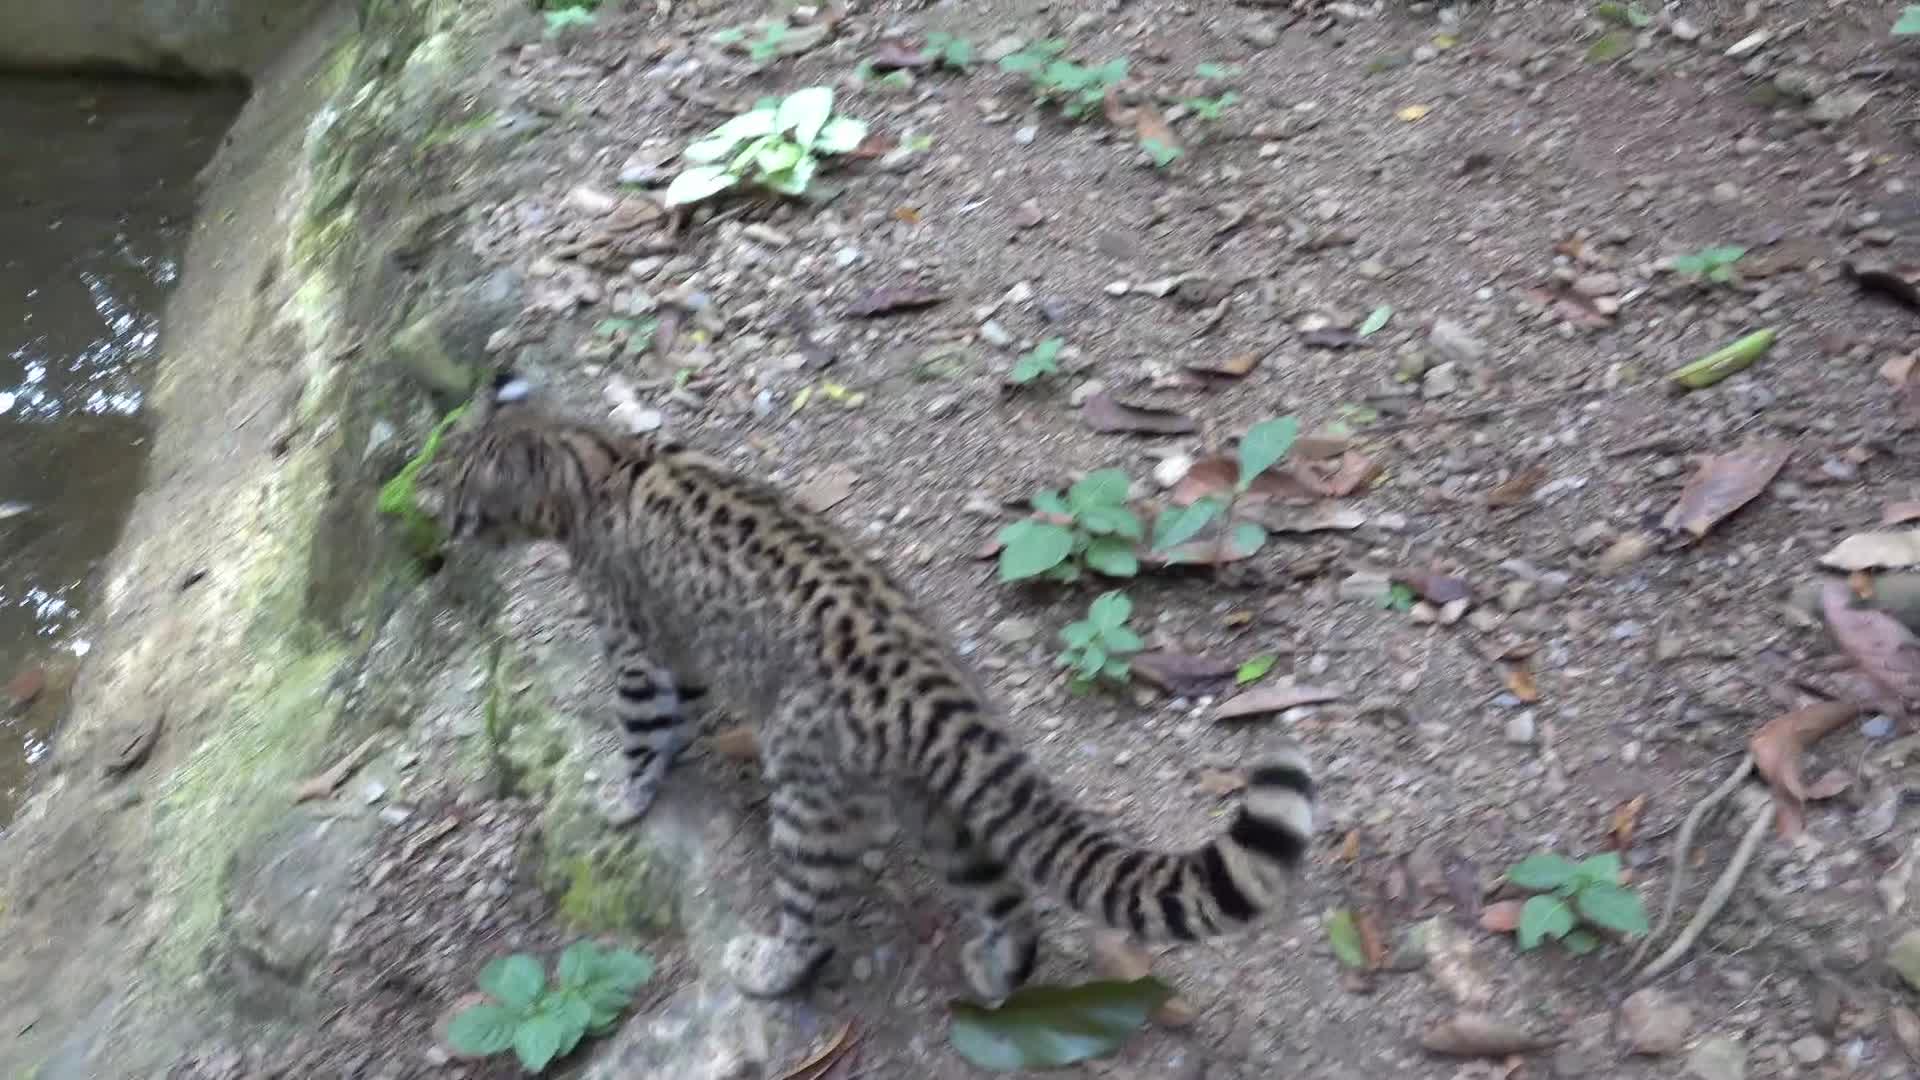 Rescued Geoffroy's Cat Relaxes in Forest